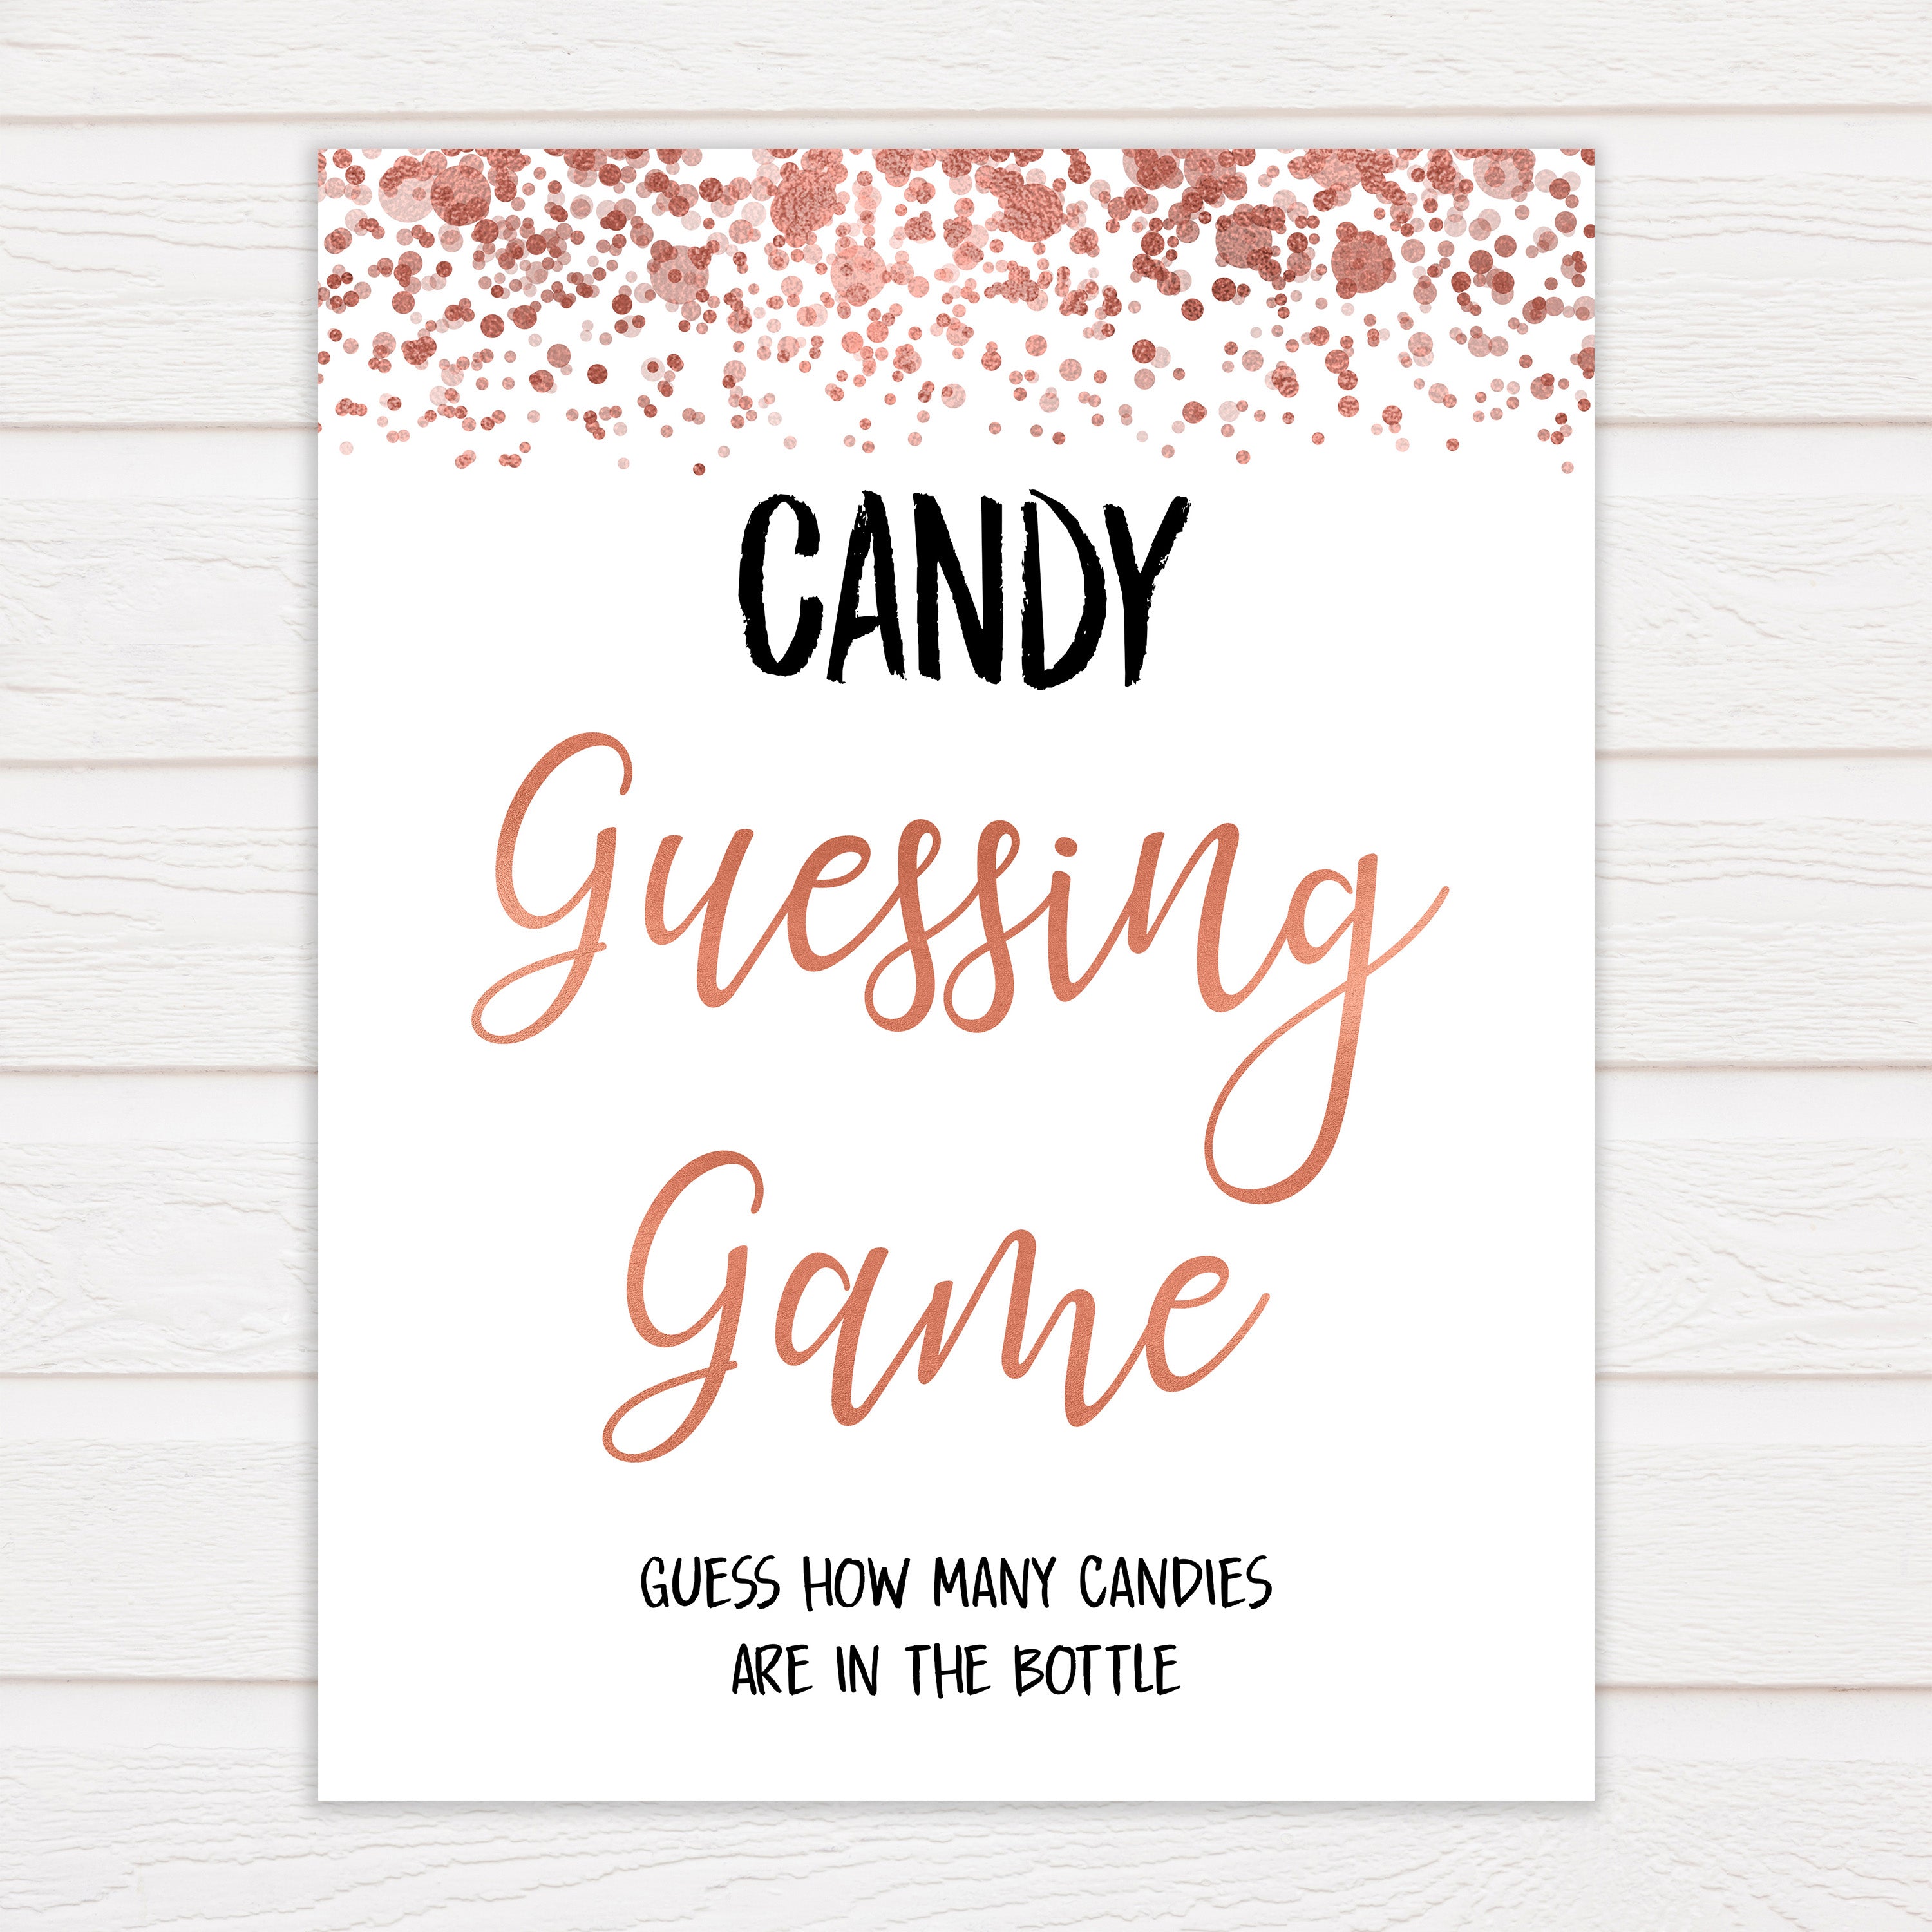 candy-jar-guessing-game-how-many-candies-in-jar-birthday-party-party